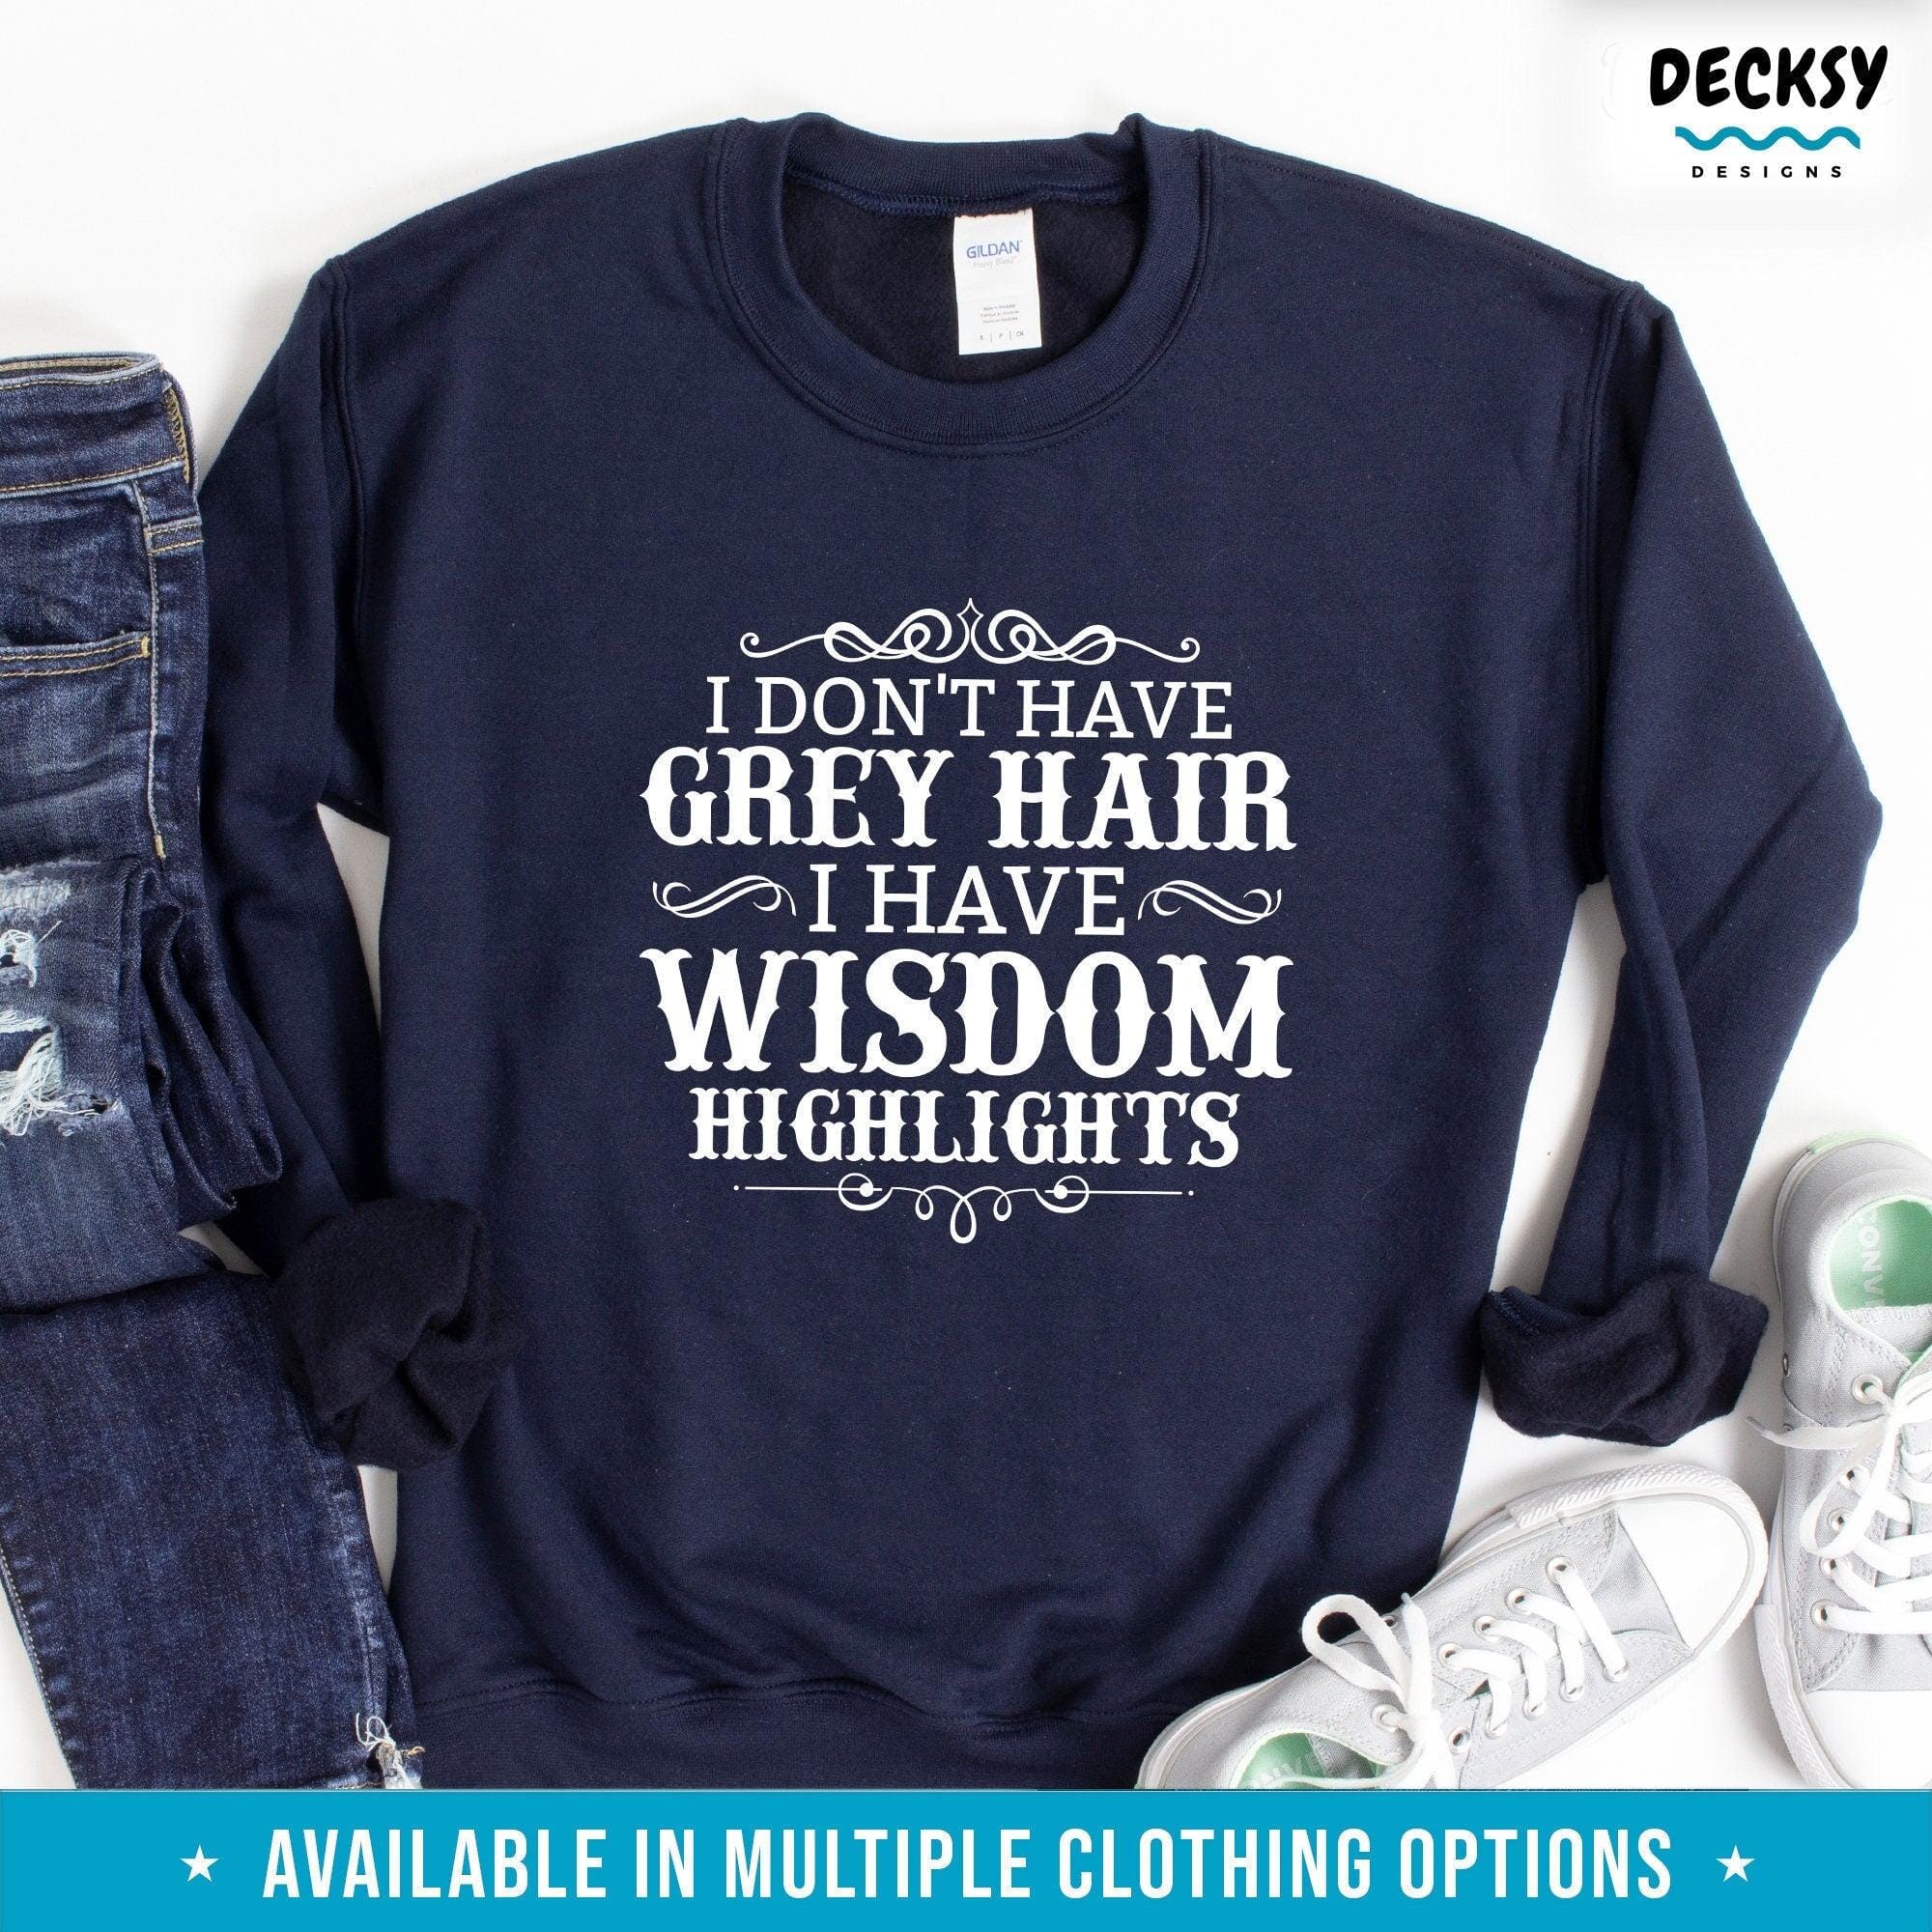 Grey Hair T Shirt, Grandparents Gift-Clothing:Gender-Neutral Adult Clothing:Tops & Tees:T-shirts:Graphic Tees-DecksyDesigns